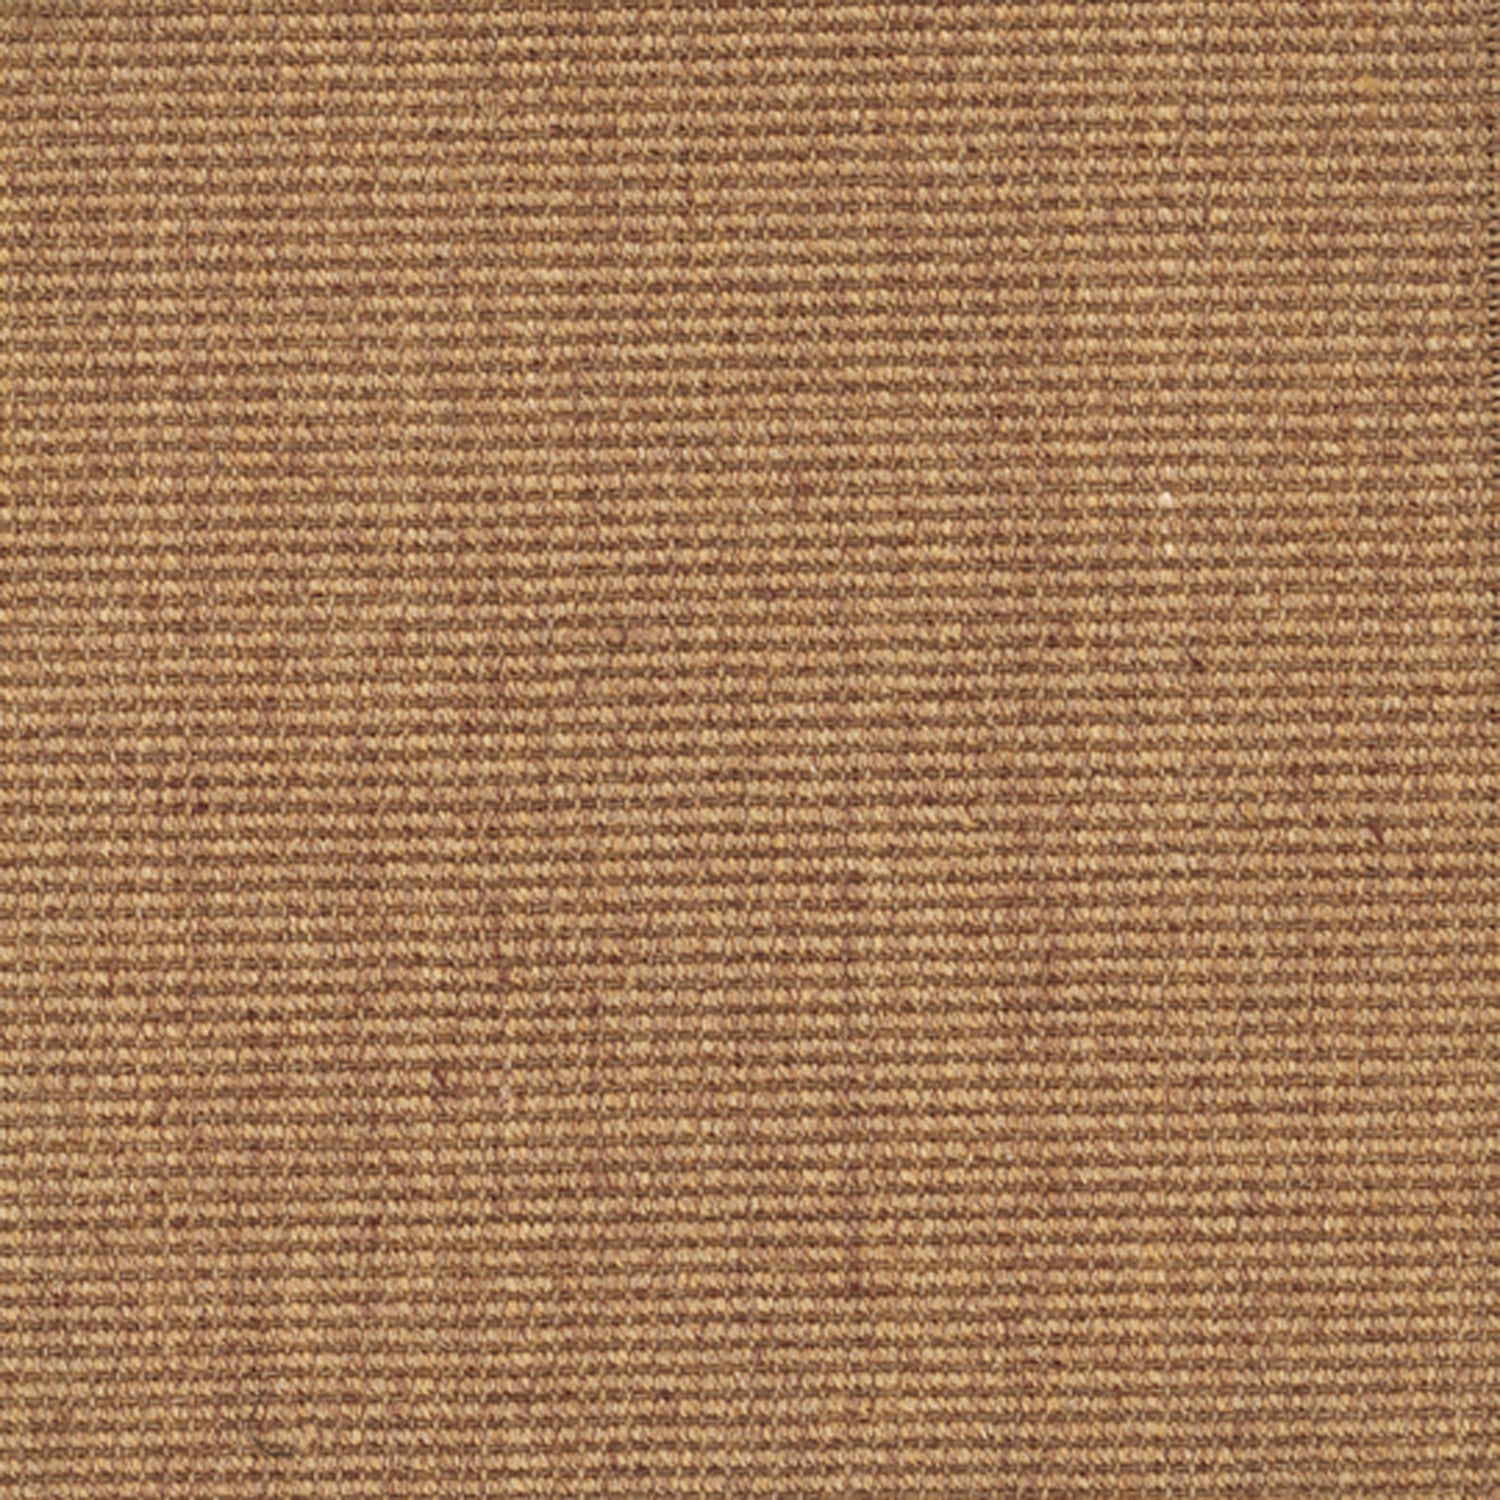 Sisal broadloom carpet swatch in a ribbed weave in bronze and tan.